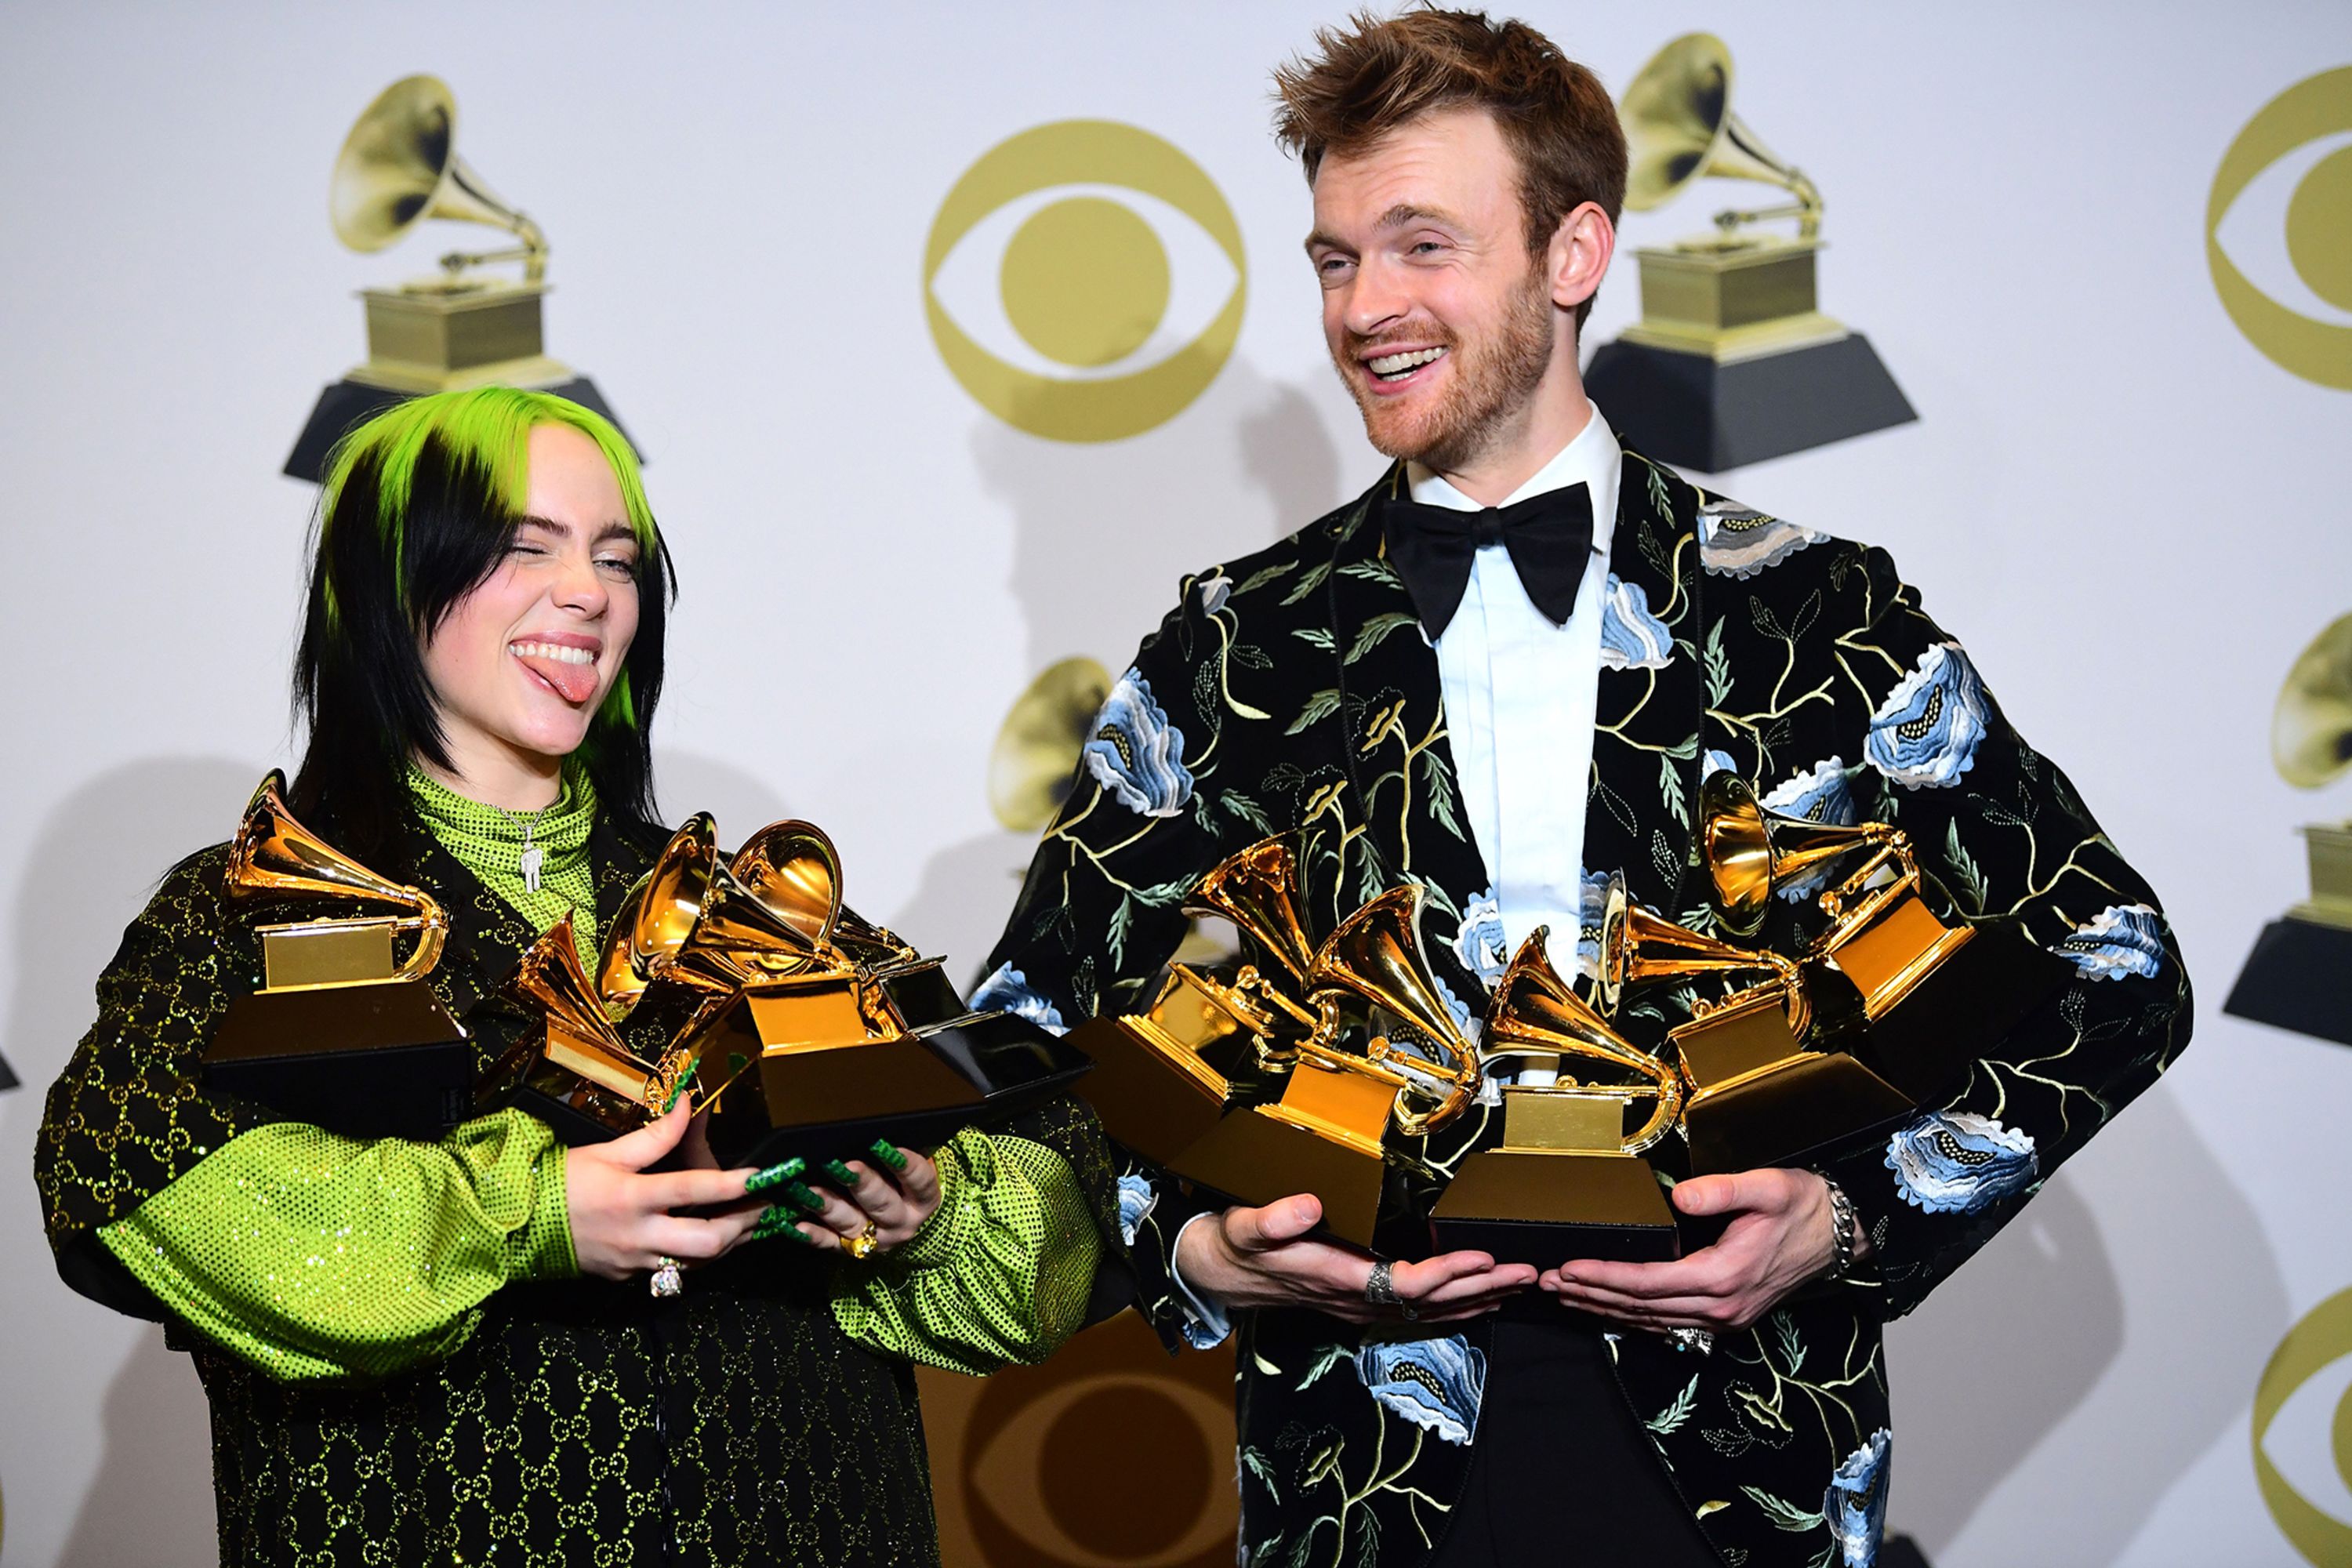 Billie Eilish and her brother and producer Finneas O'Connell pose in the press room with their awards for Album of the Year, Record of the Year, Best New Artist, Song of the Year and Best Pop Vocal Album after the 62nd Annual Grammy Awards on Sunday, January 26. <a href="index.php?page=&url=https%3A%2F%2Fwww.cnn.com%2F2020%2F01%2F27%2Fentertainment%2Fbillie-eilish-grammys%2Findex.html" target="_blank">The 18-year-old stole the night after sweeping the four biggest prizes.</a>